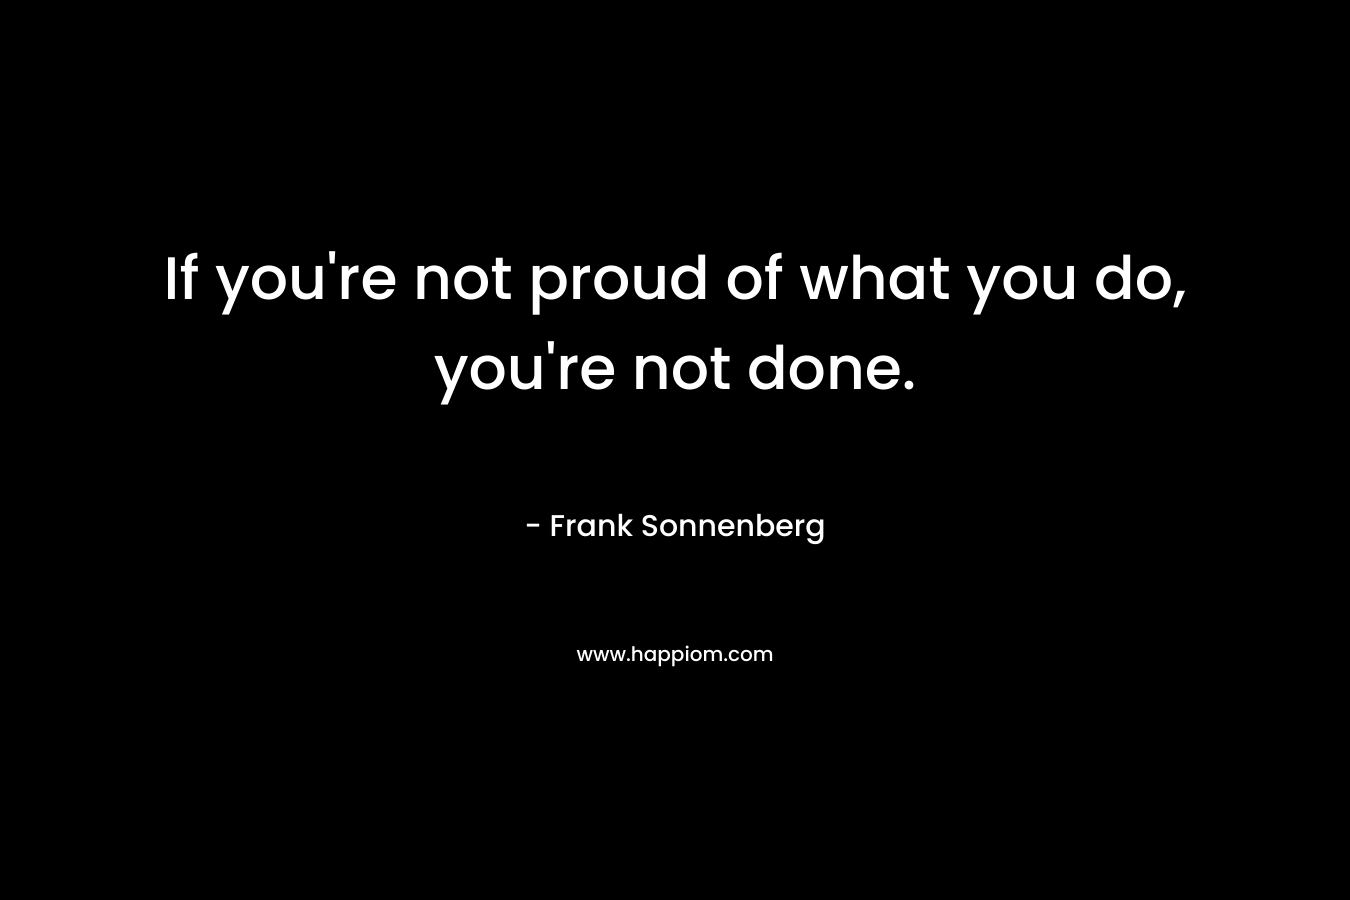 If you're not proud of what you do, you're not done.